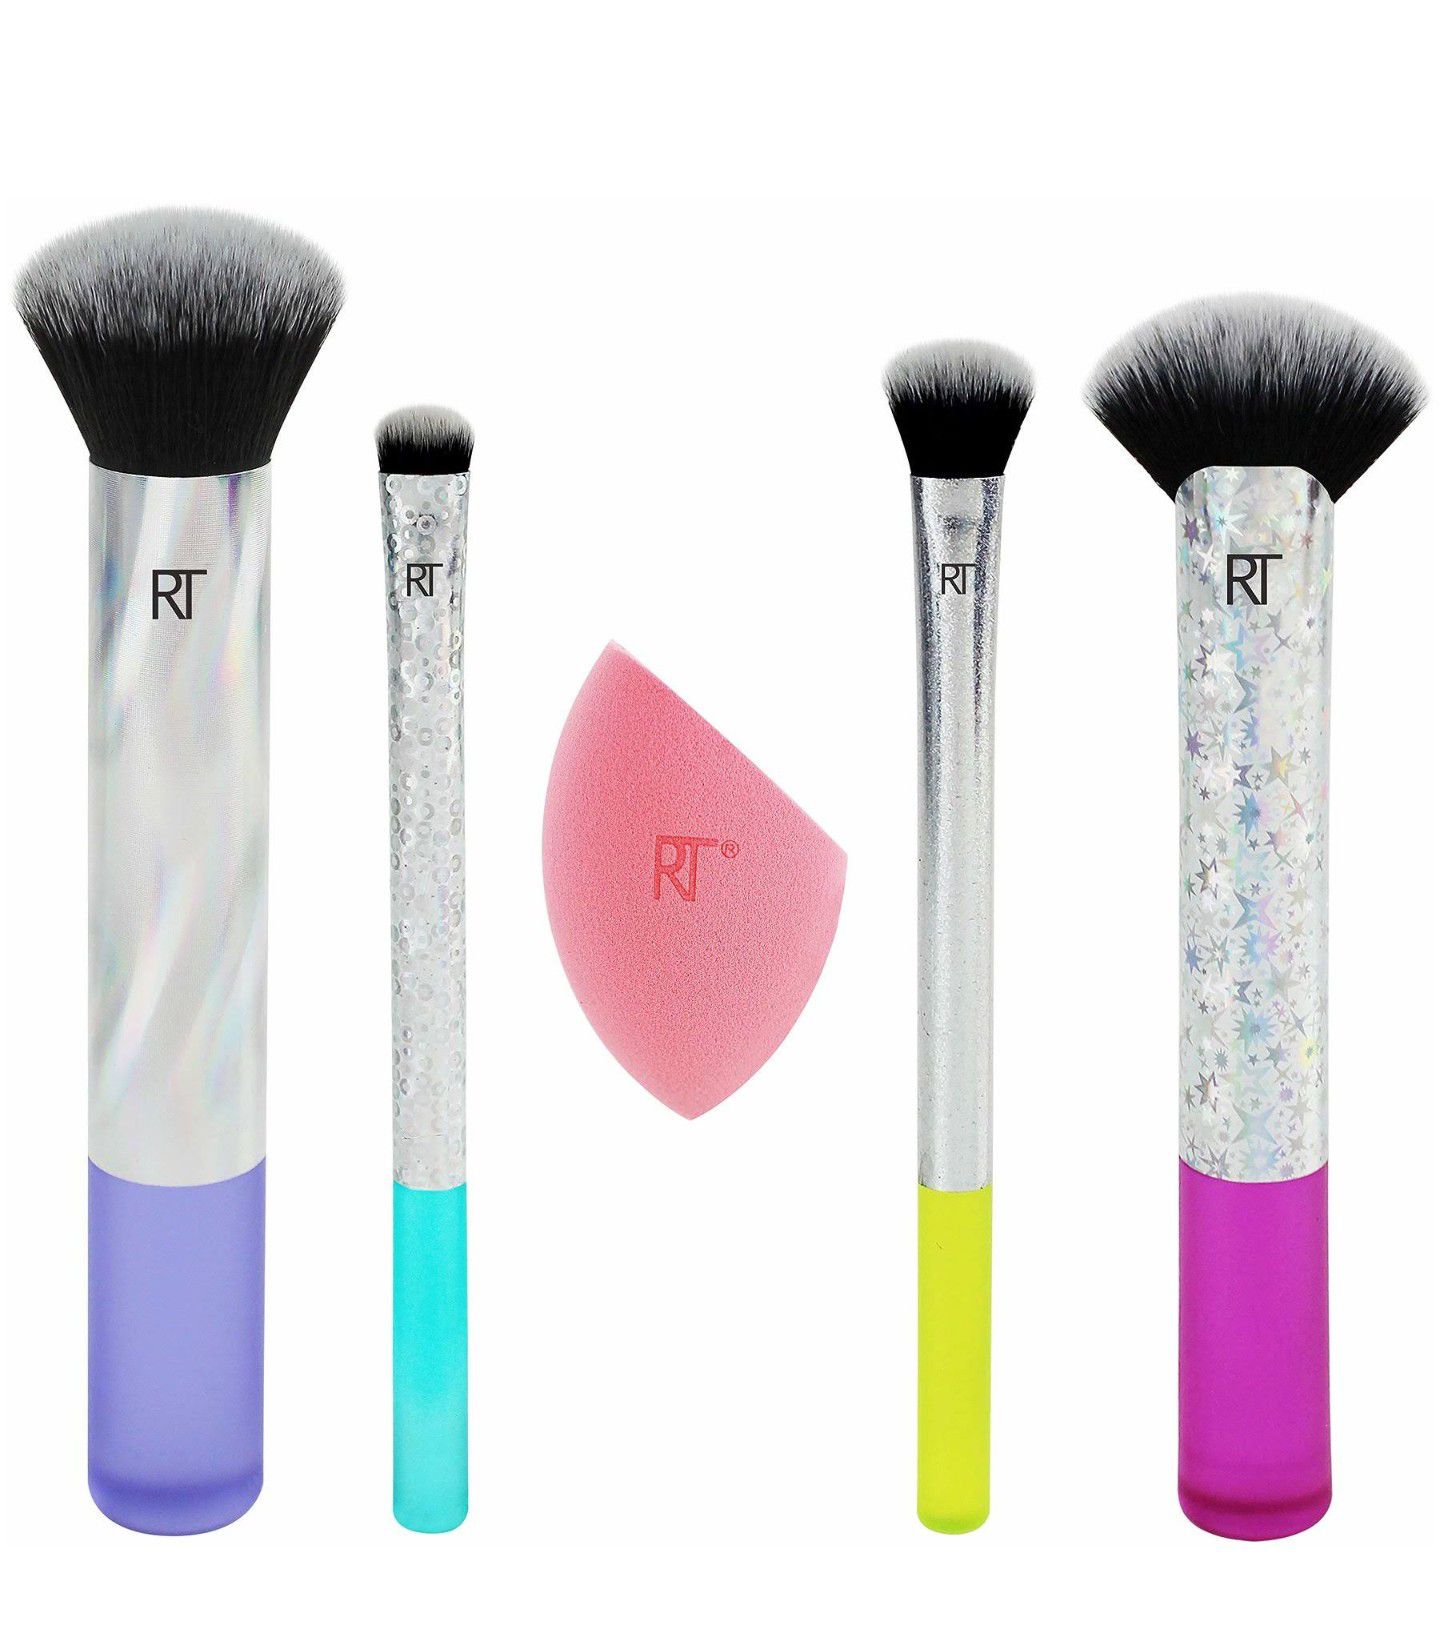 Real techniques limited edition neon lights 5 piece makeup brush set by Sam & nic NEW in box